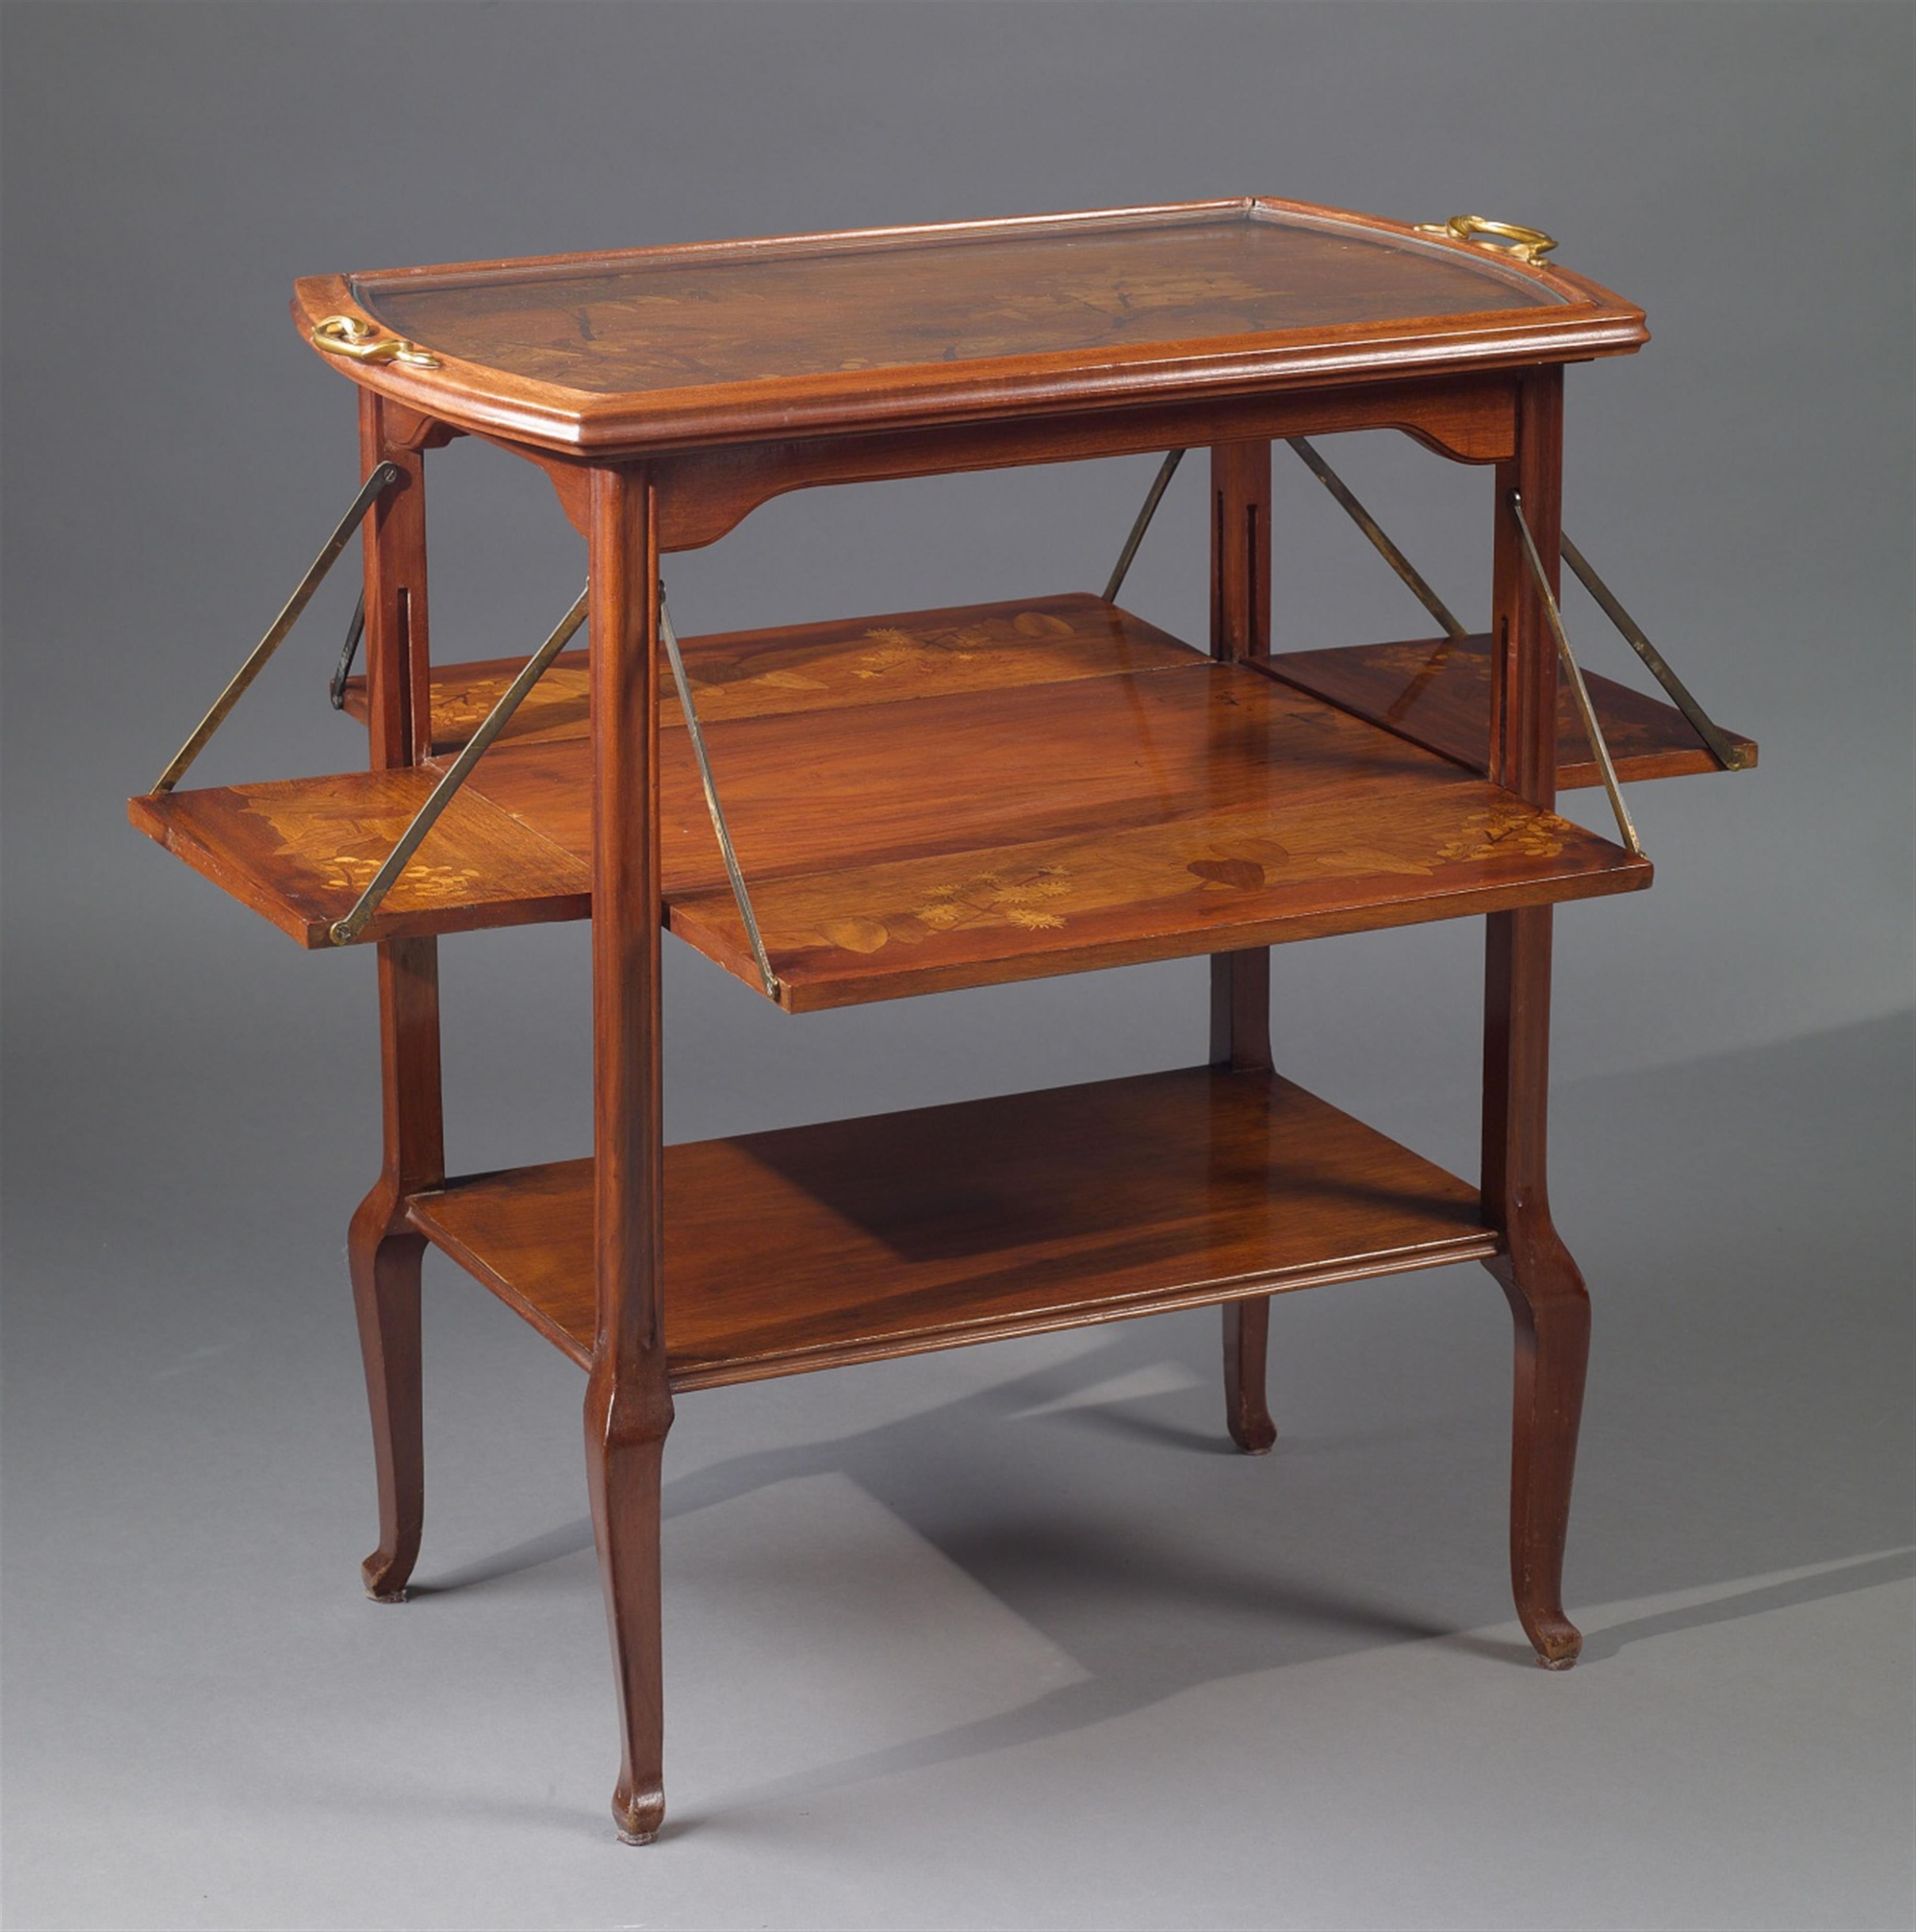 A bronze-mounted Louis Majorelle mahogany and satinwood tea table - image-1